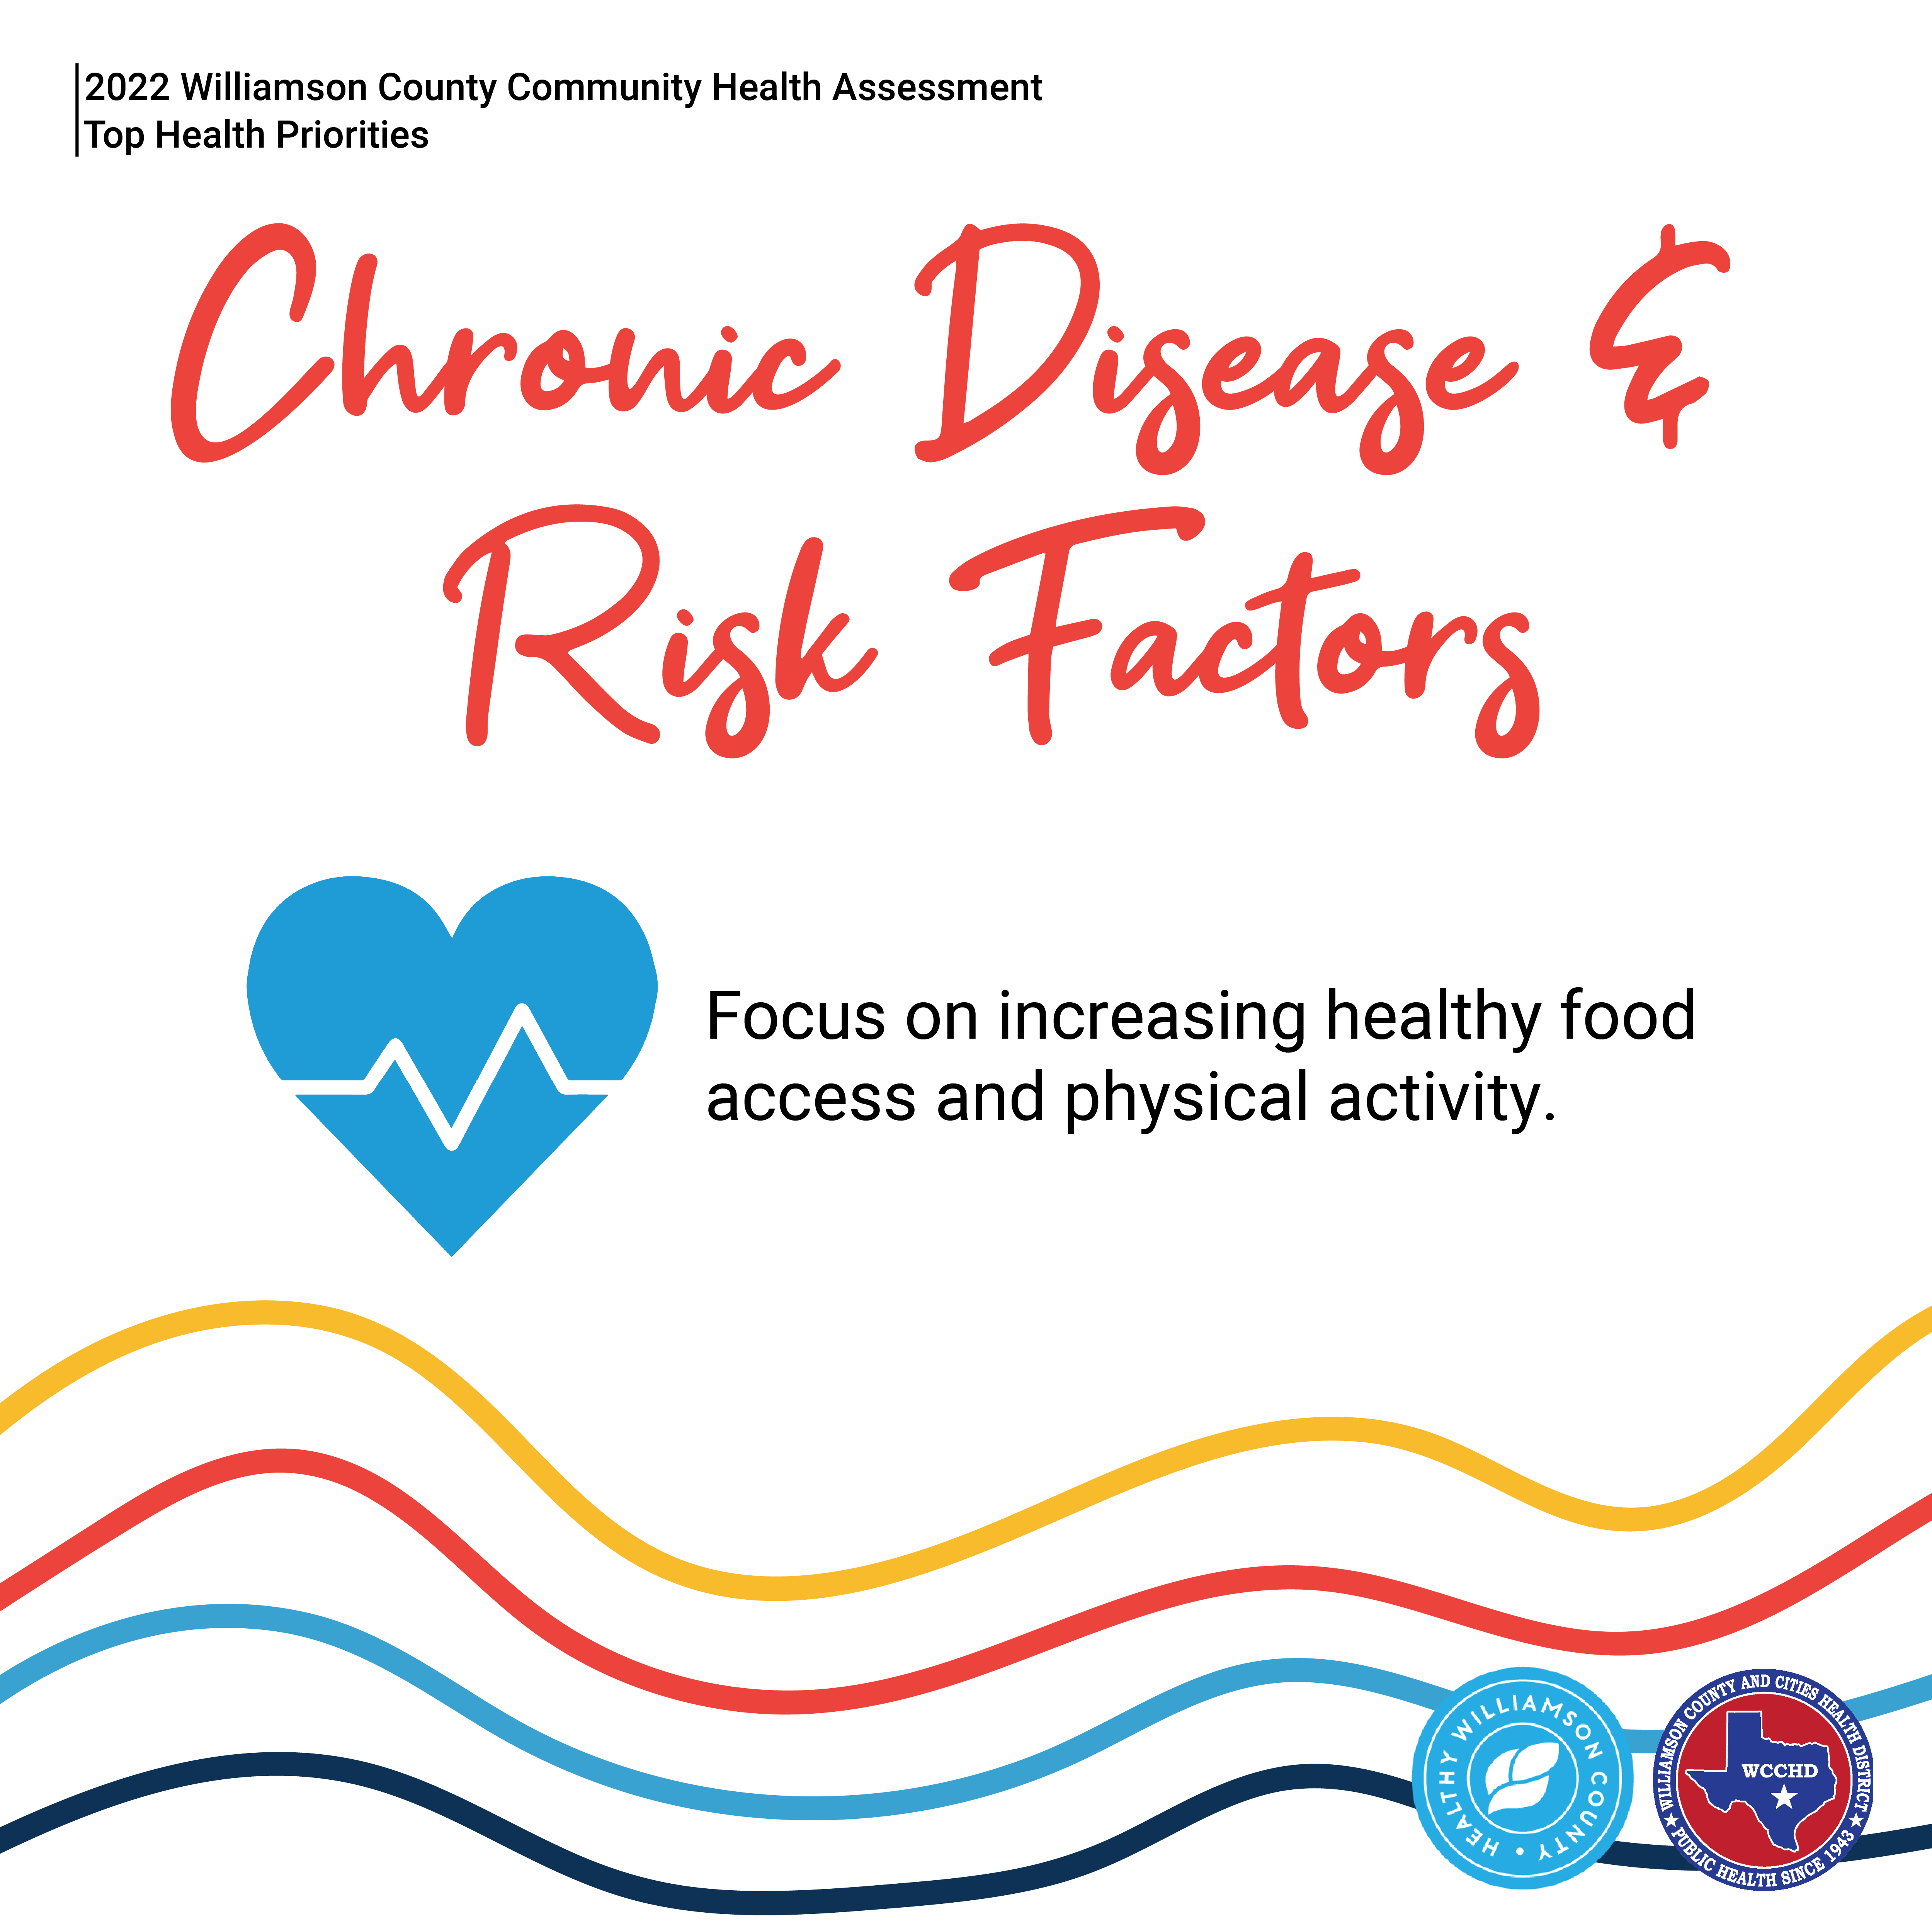 2022 Williamson County Community Health Assessment. Top Health Priorities. Chronic disease & risk factors. Below, an icon of a heart with an electrocardiogram line inside. Text to the right:  Focus on increasing healthy food access and physical activity. Multicolored squiggly lines. Logos of Healthy Williamson County and Williamson County and Cities Health District.